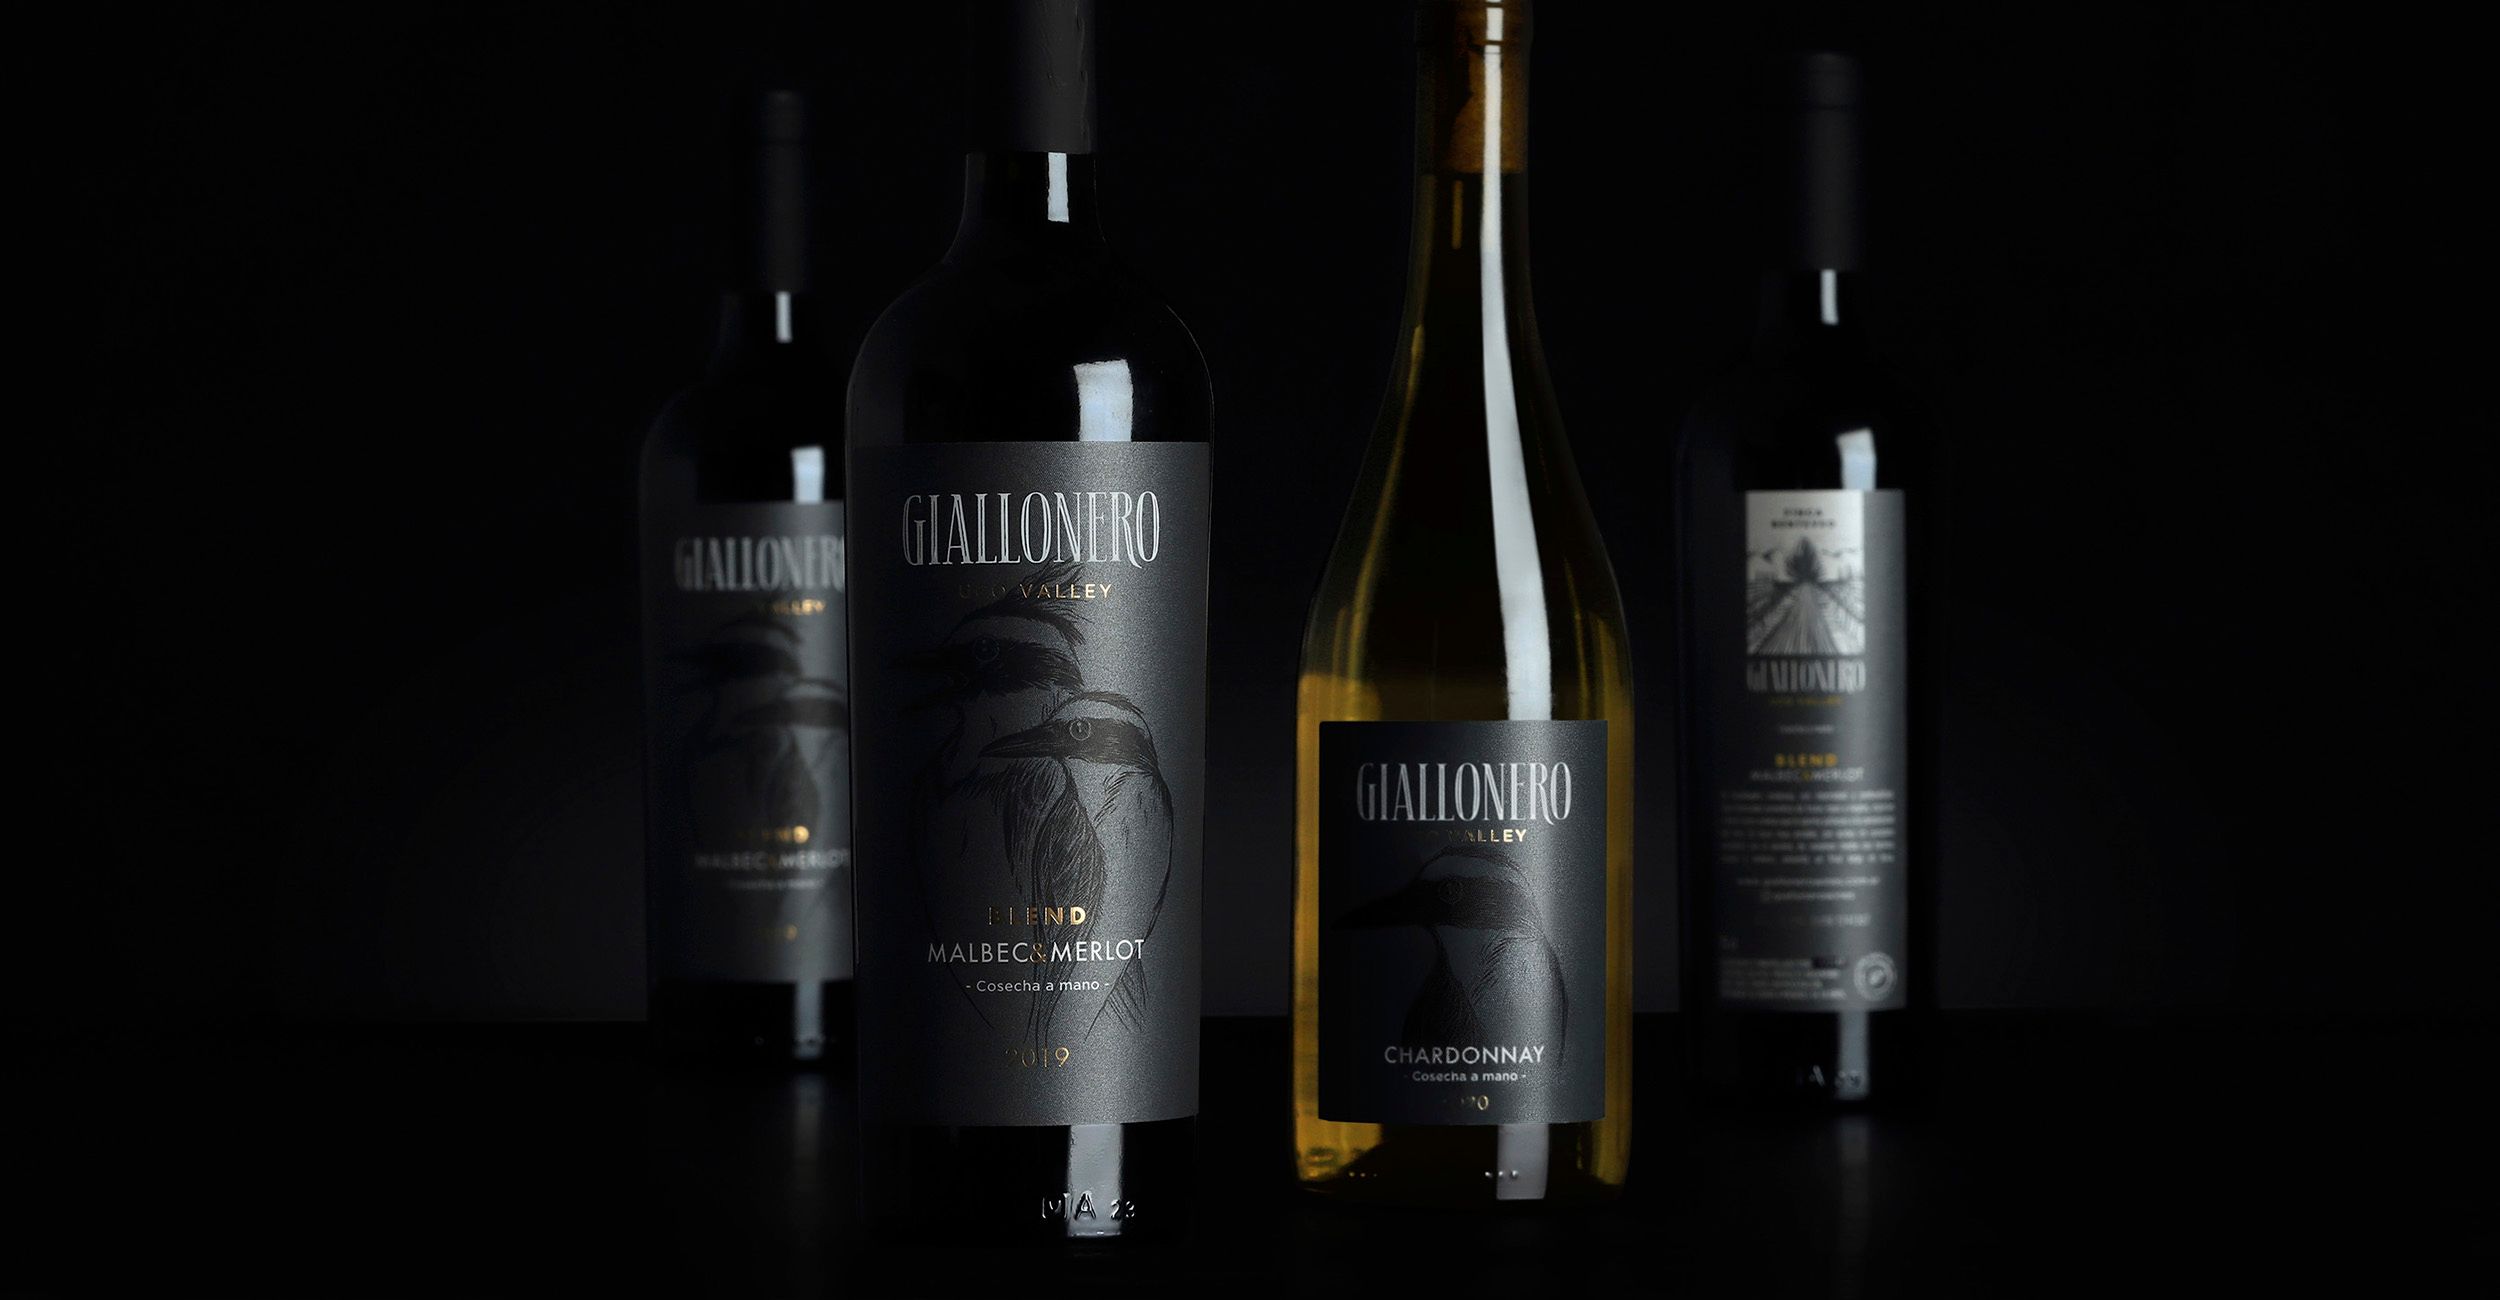 Label system for Giallonero wines